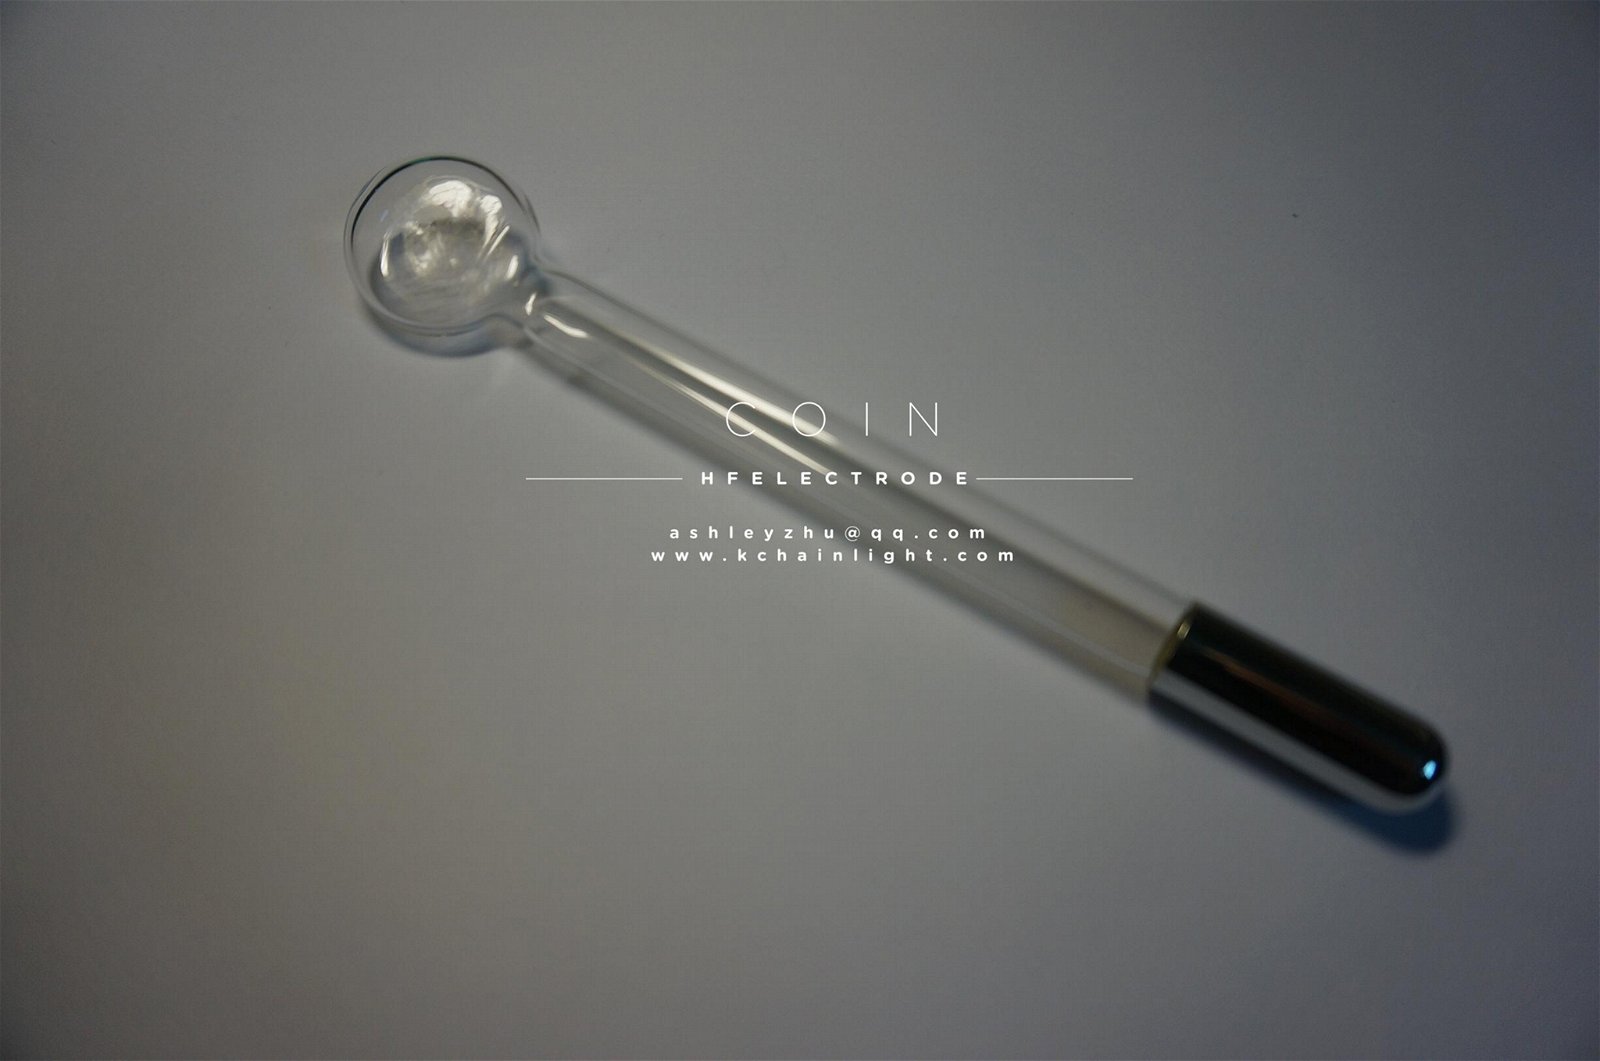 "COIN" HIGH FREQUENCY ELECTRODE